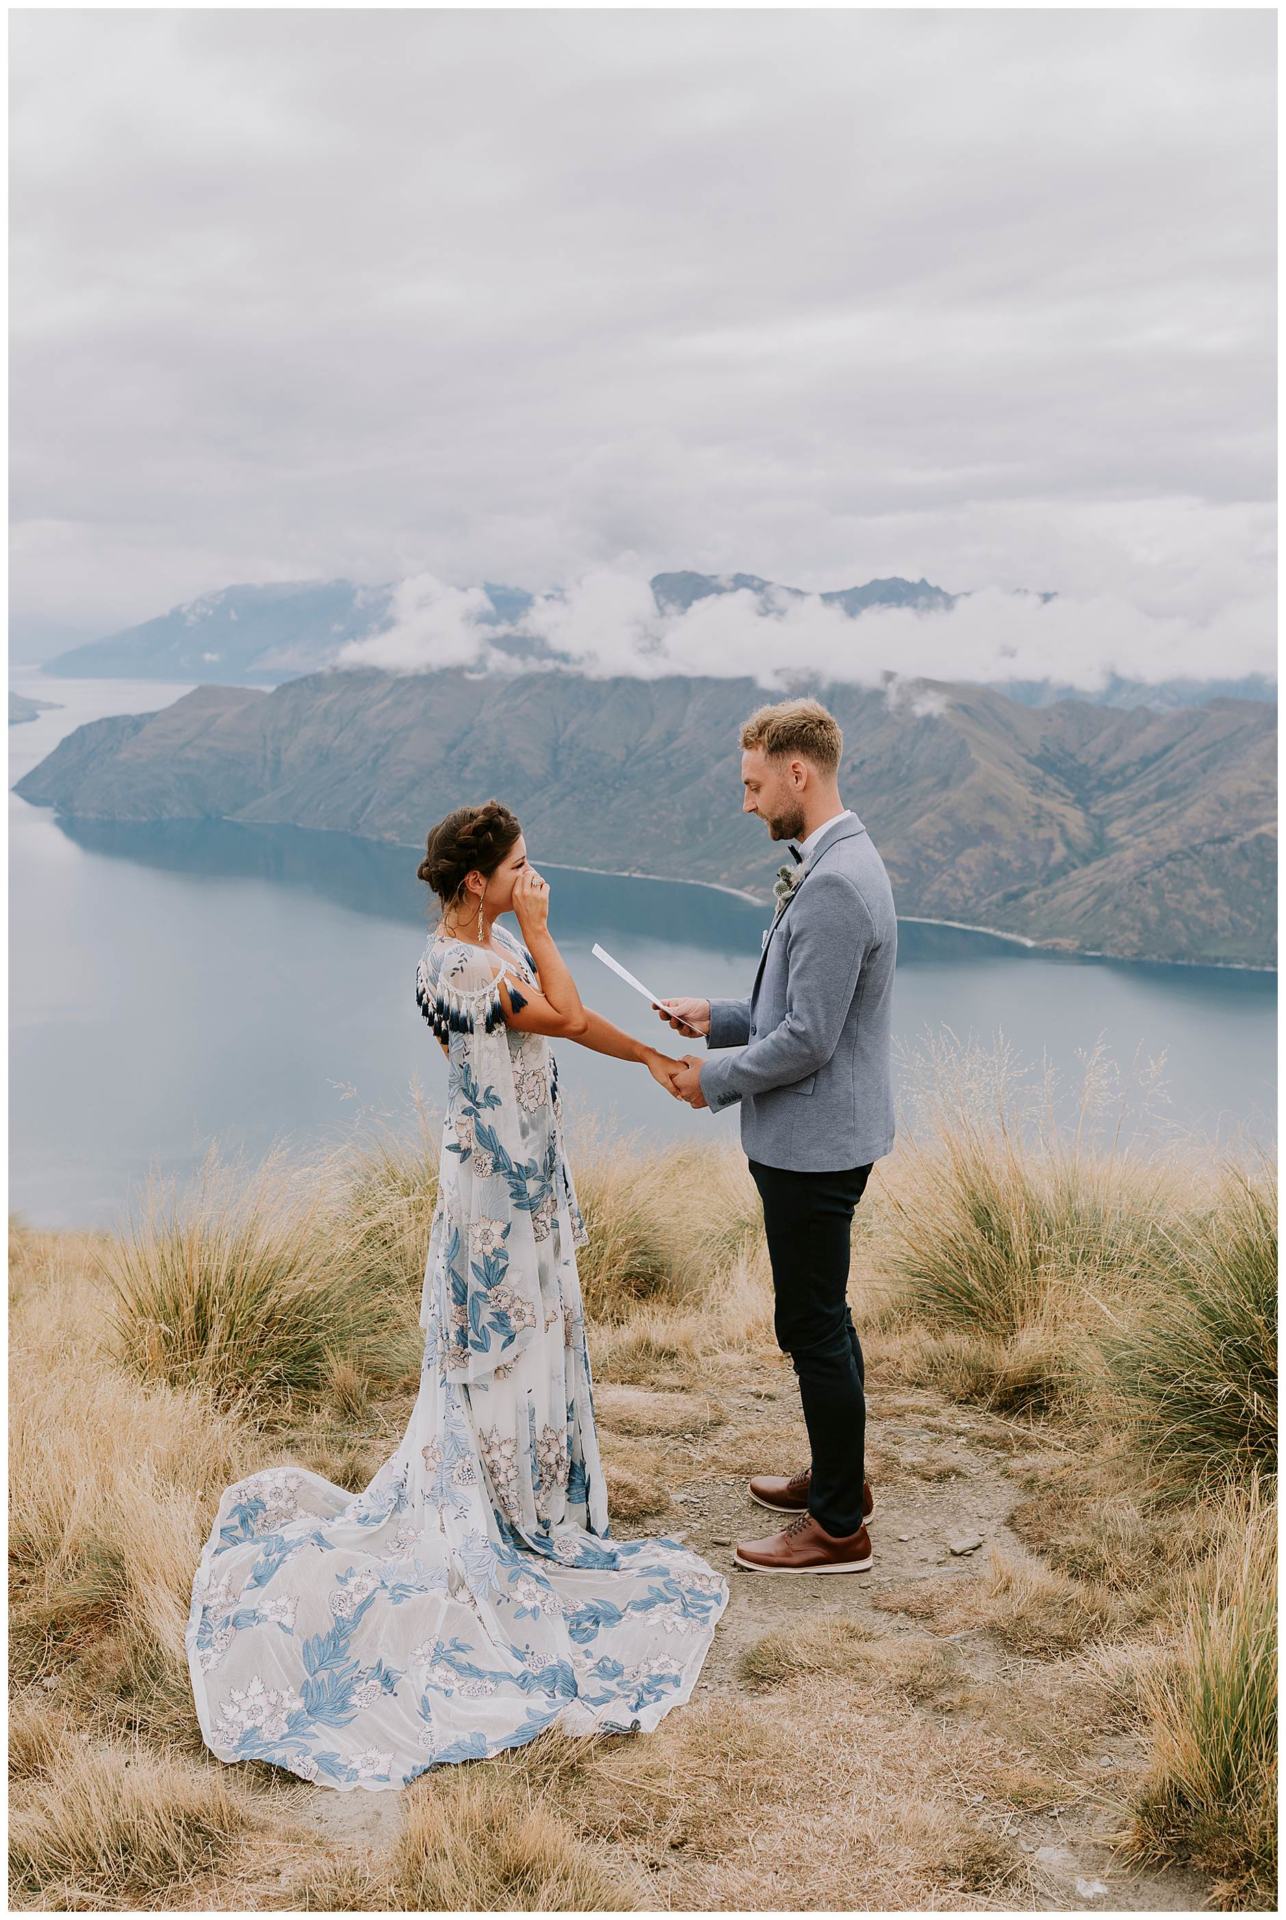 Charlotte Kiri Photography - Elopement Photography with the groom reading vows to his emotional bride on top of Roy's Peak, which overlooks a beautiful lake and mountain view in Wanaka, New Zealand